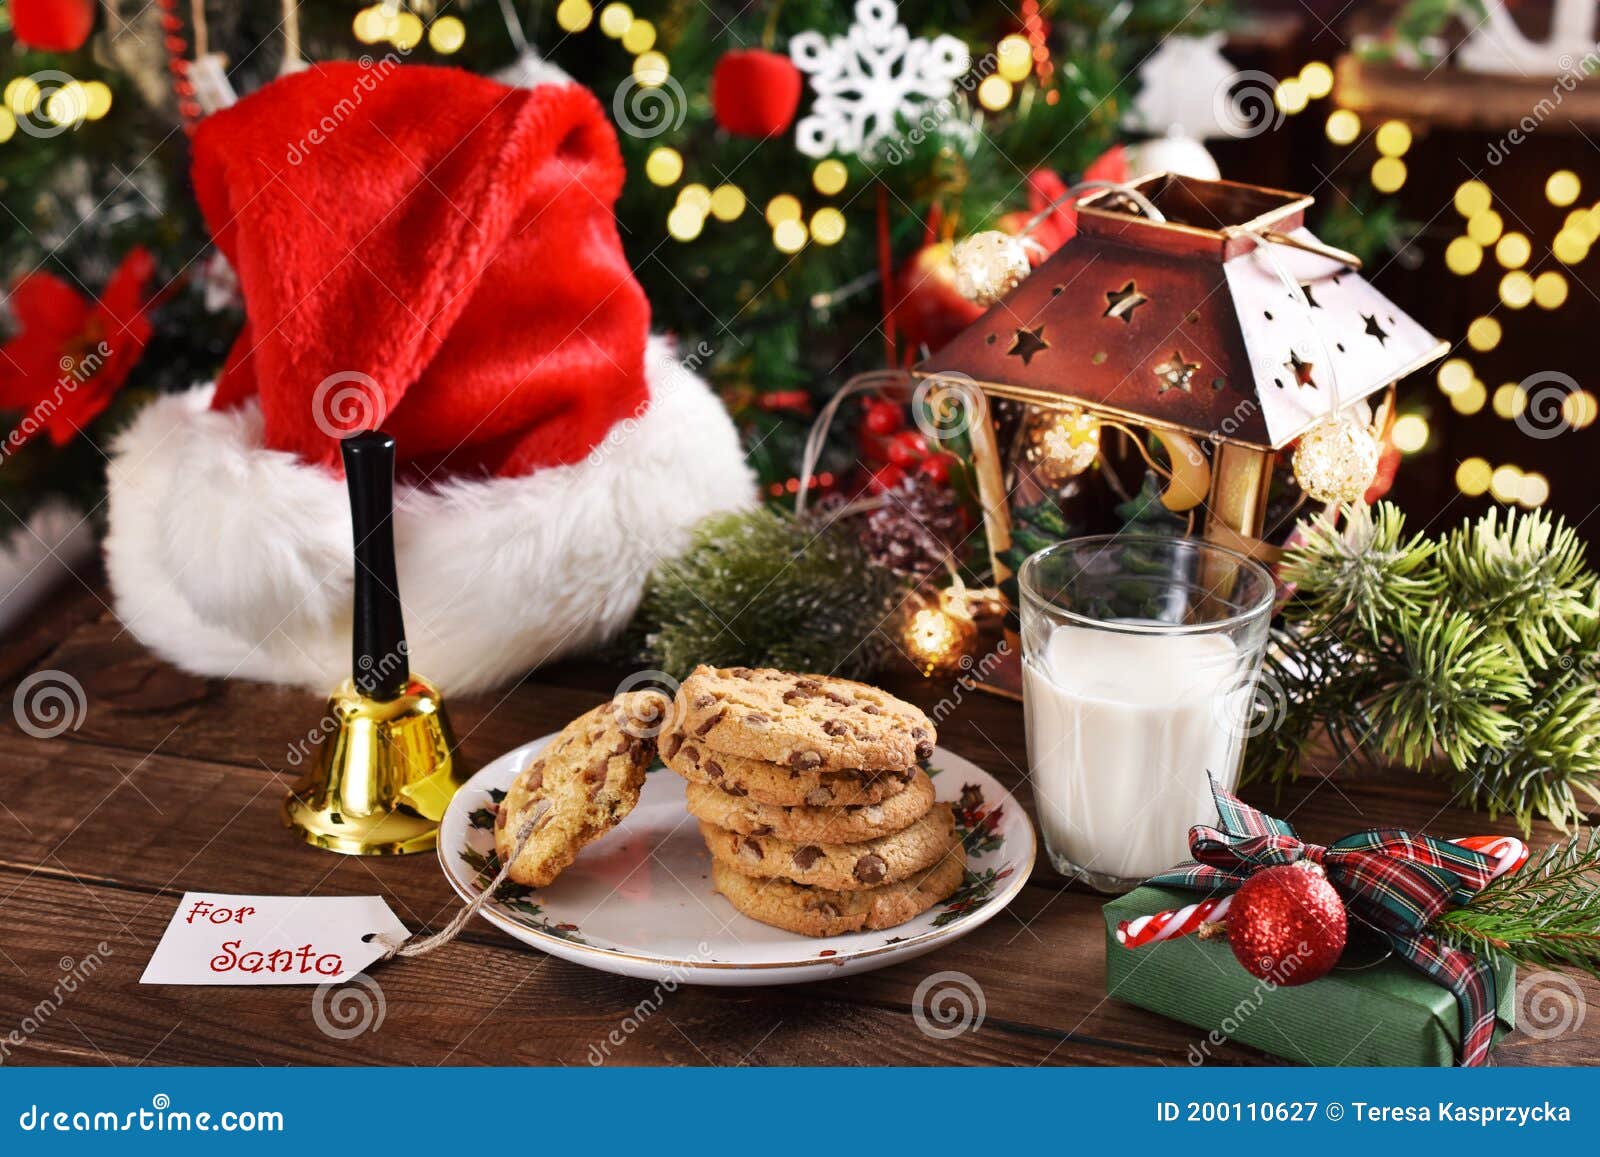 Intimate Discuss cargo Glass of Milk and Cookies on Wooden Table for Santa Claus Stock Image -  Image of glass, left: 200110627